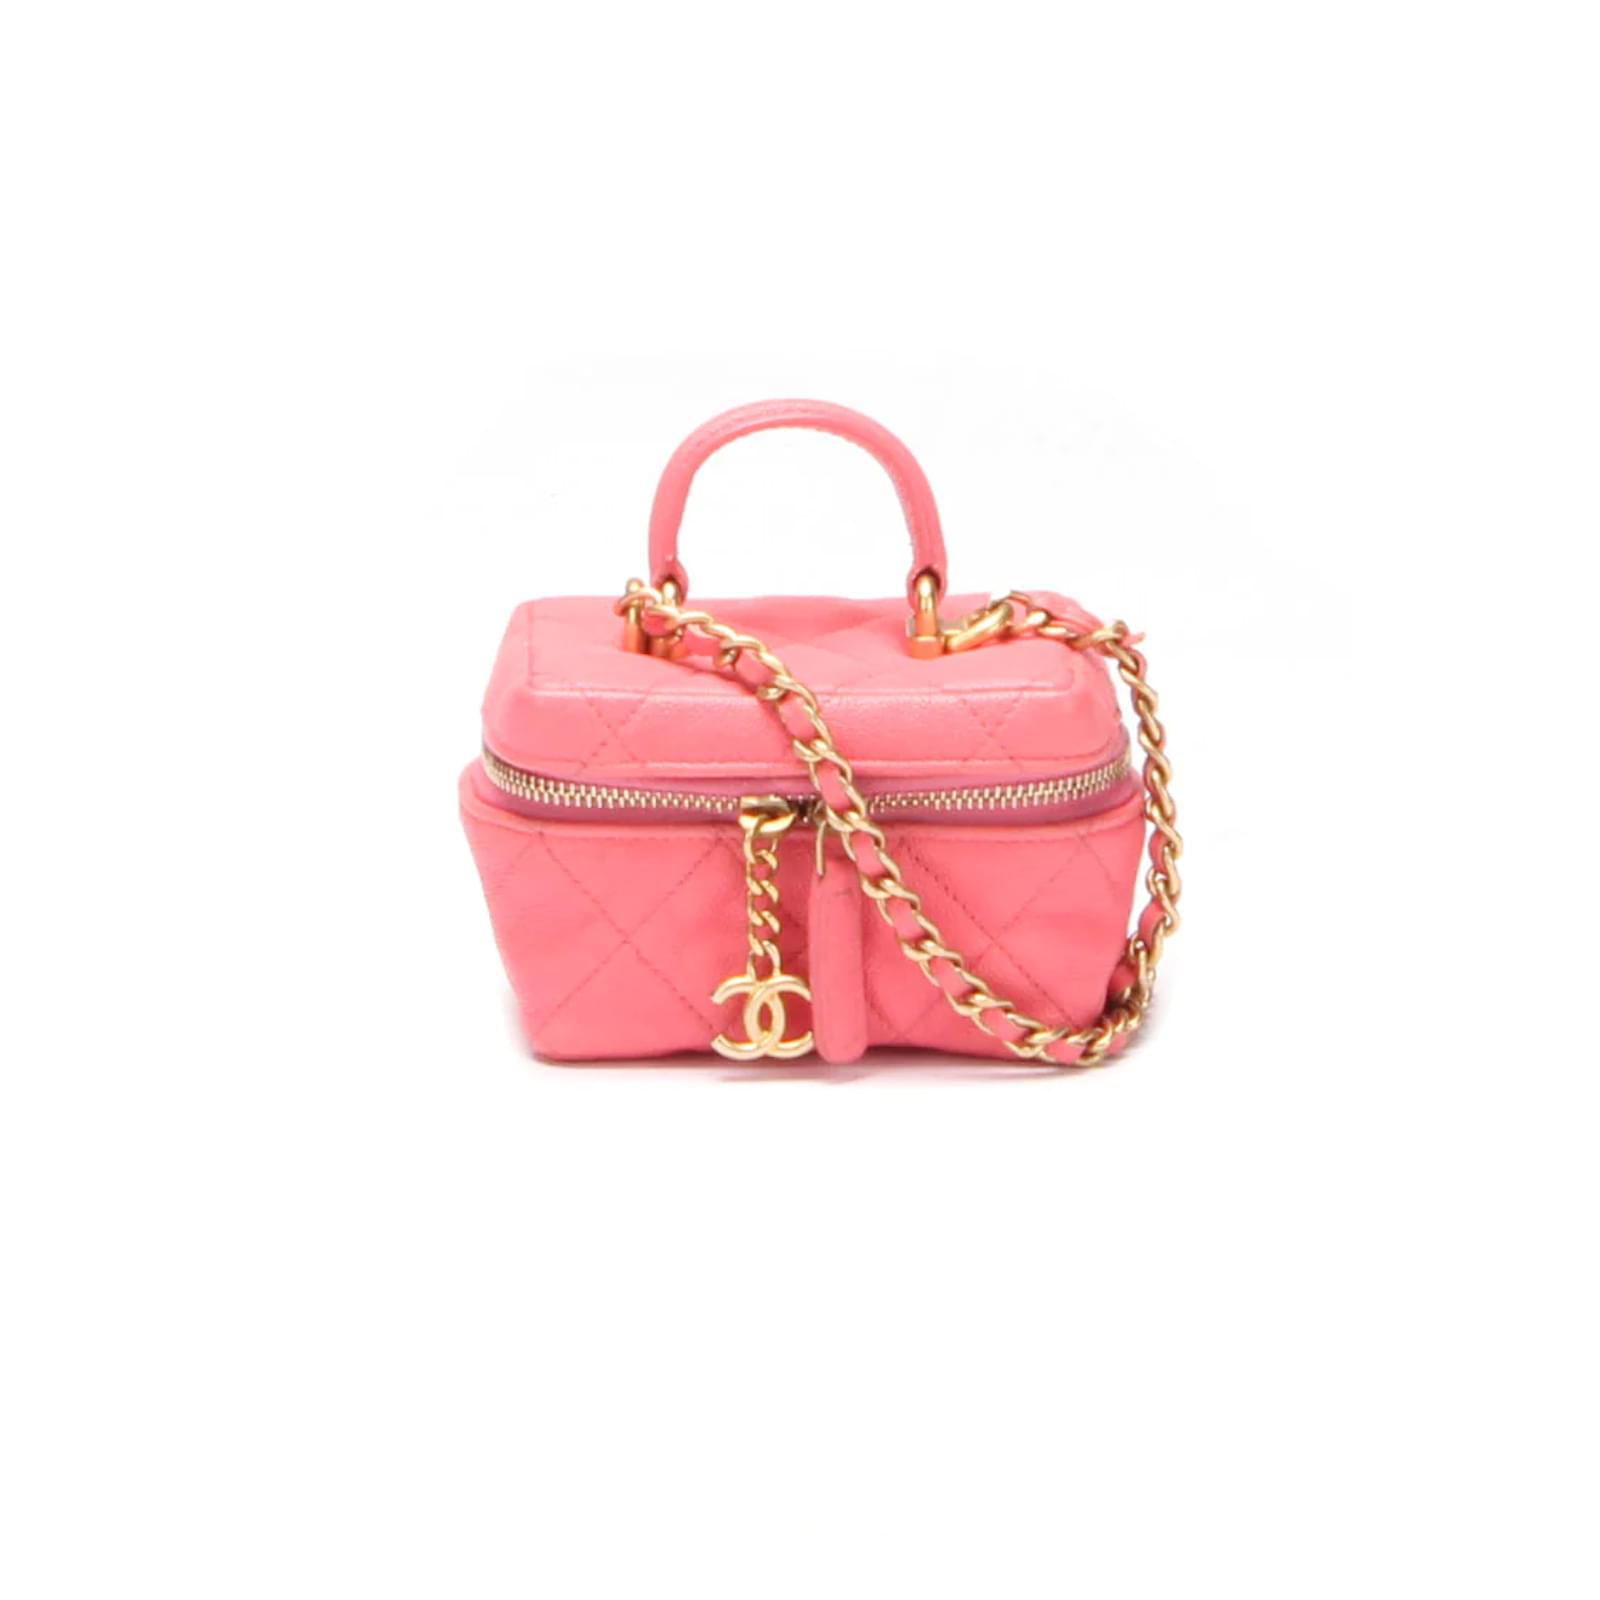 Spring/Summer 2021 Caviar Mini Vanity Case with Chain